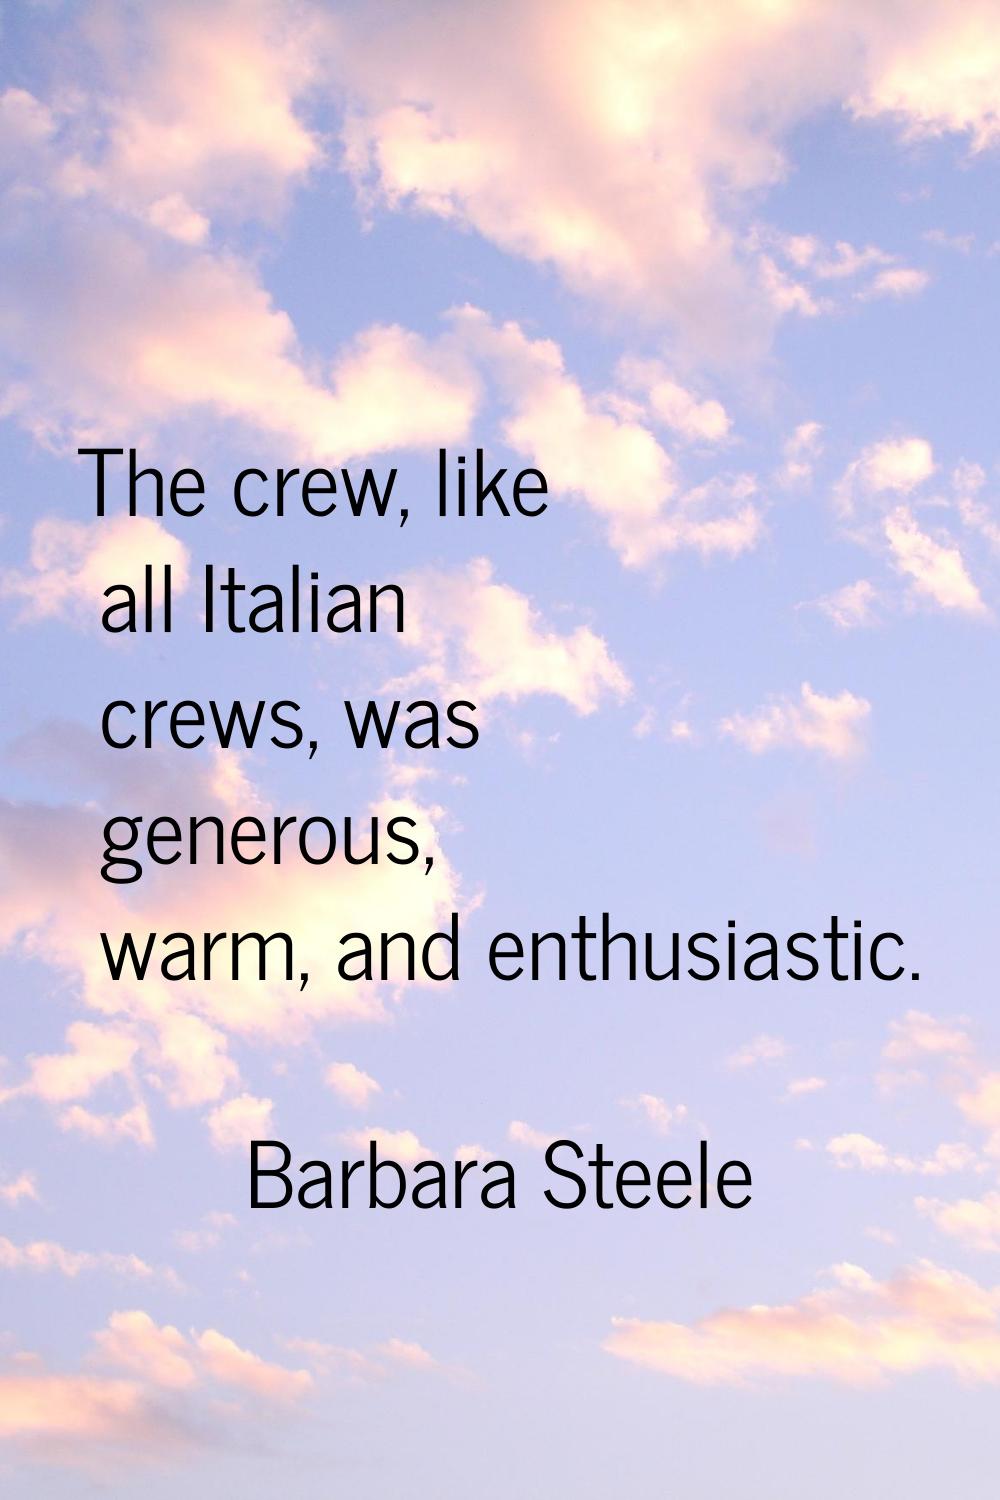 The crew, like all Italian crews, was generous, warm, and enthusiastic.